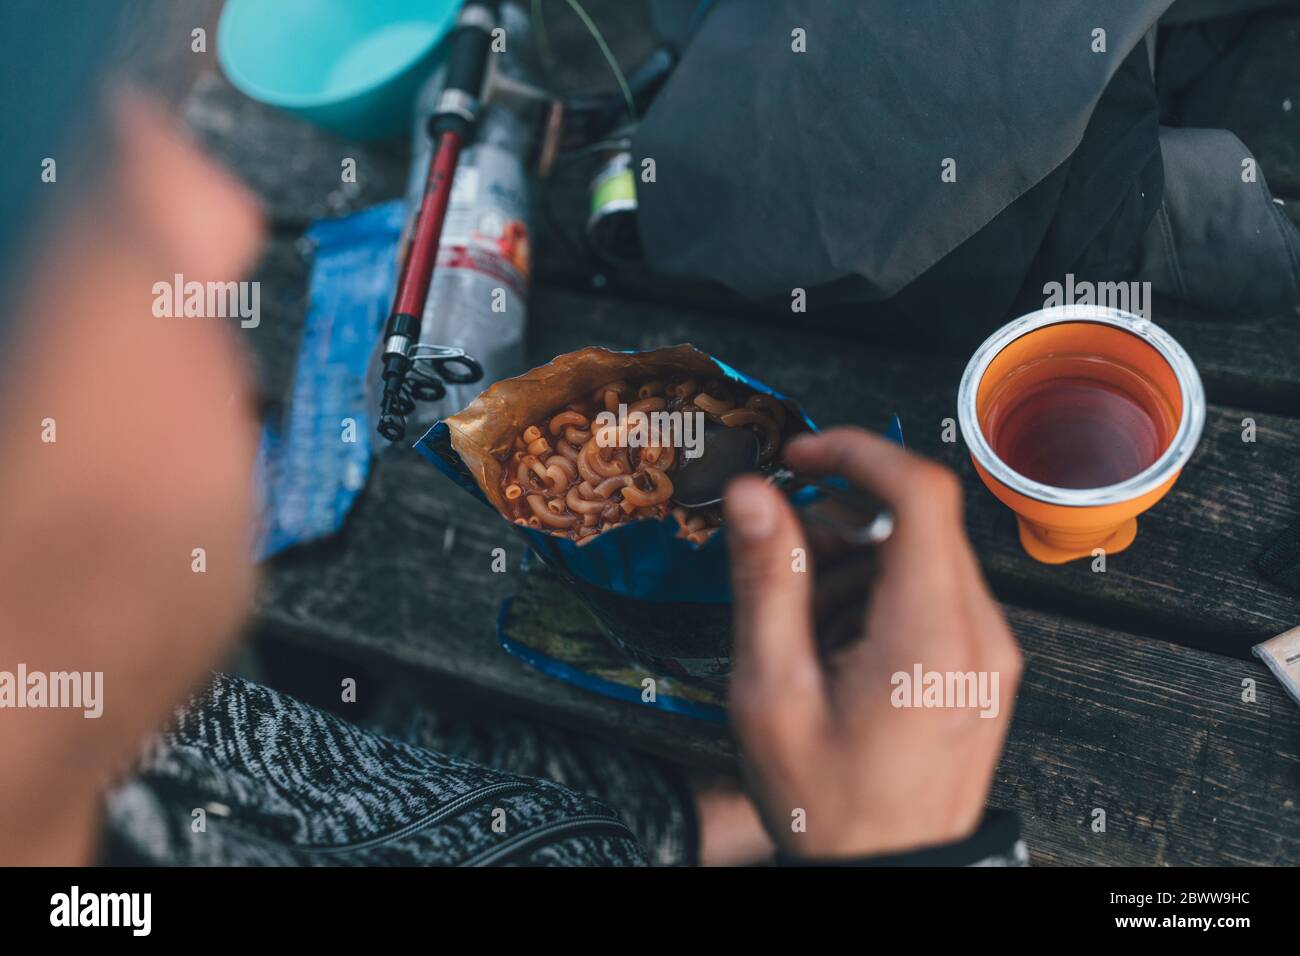 Young man eating convenience food on outdoor trip, close up Stock Photo